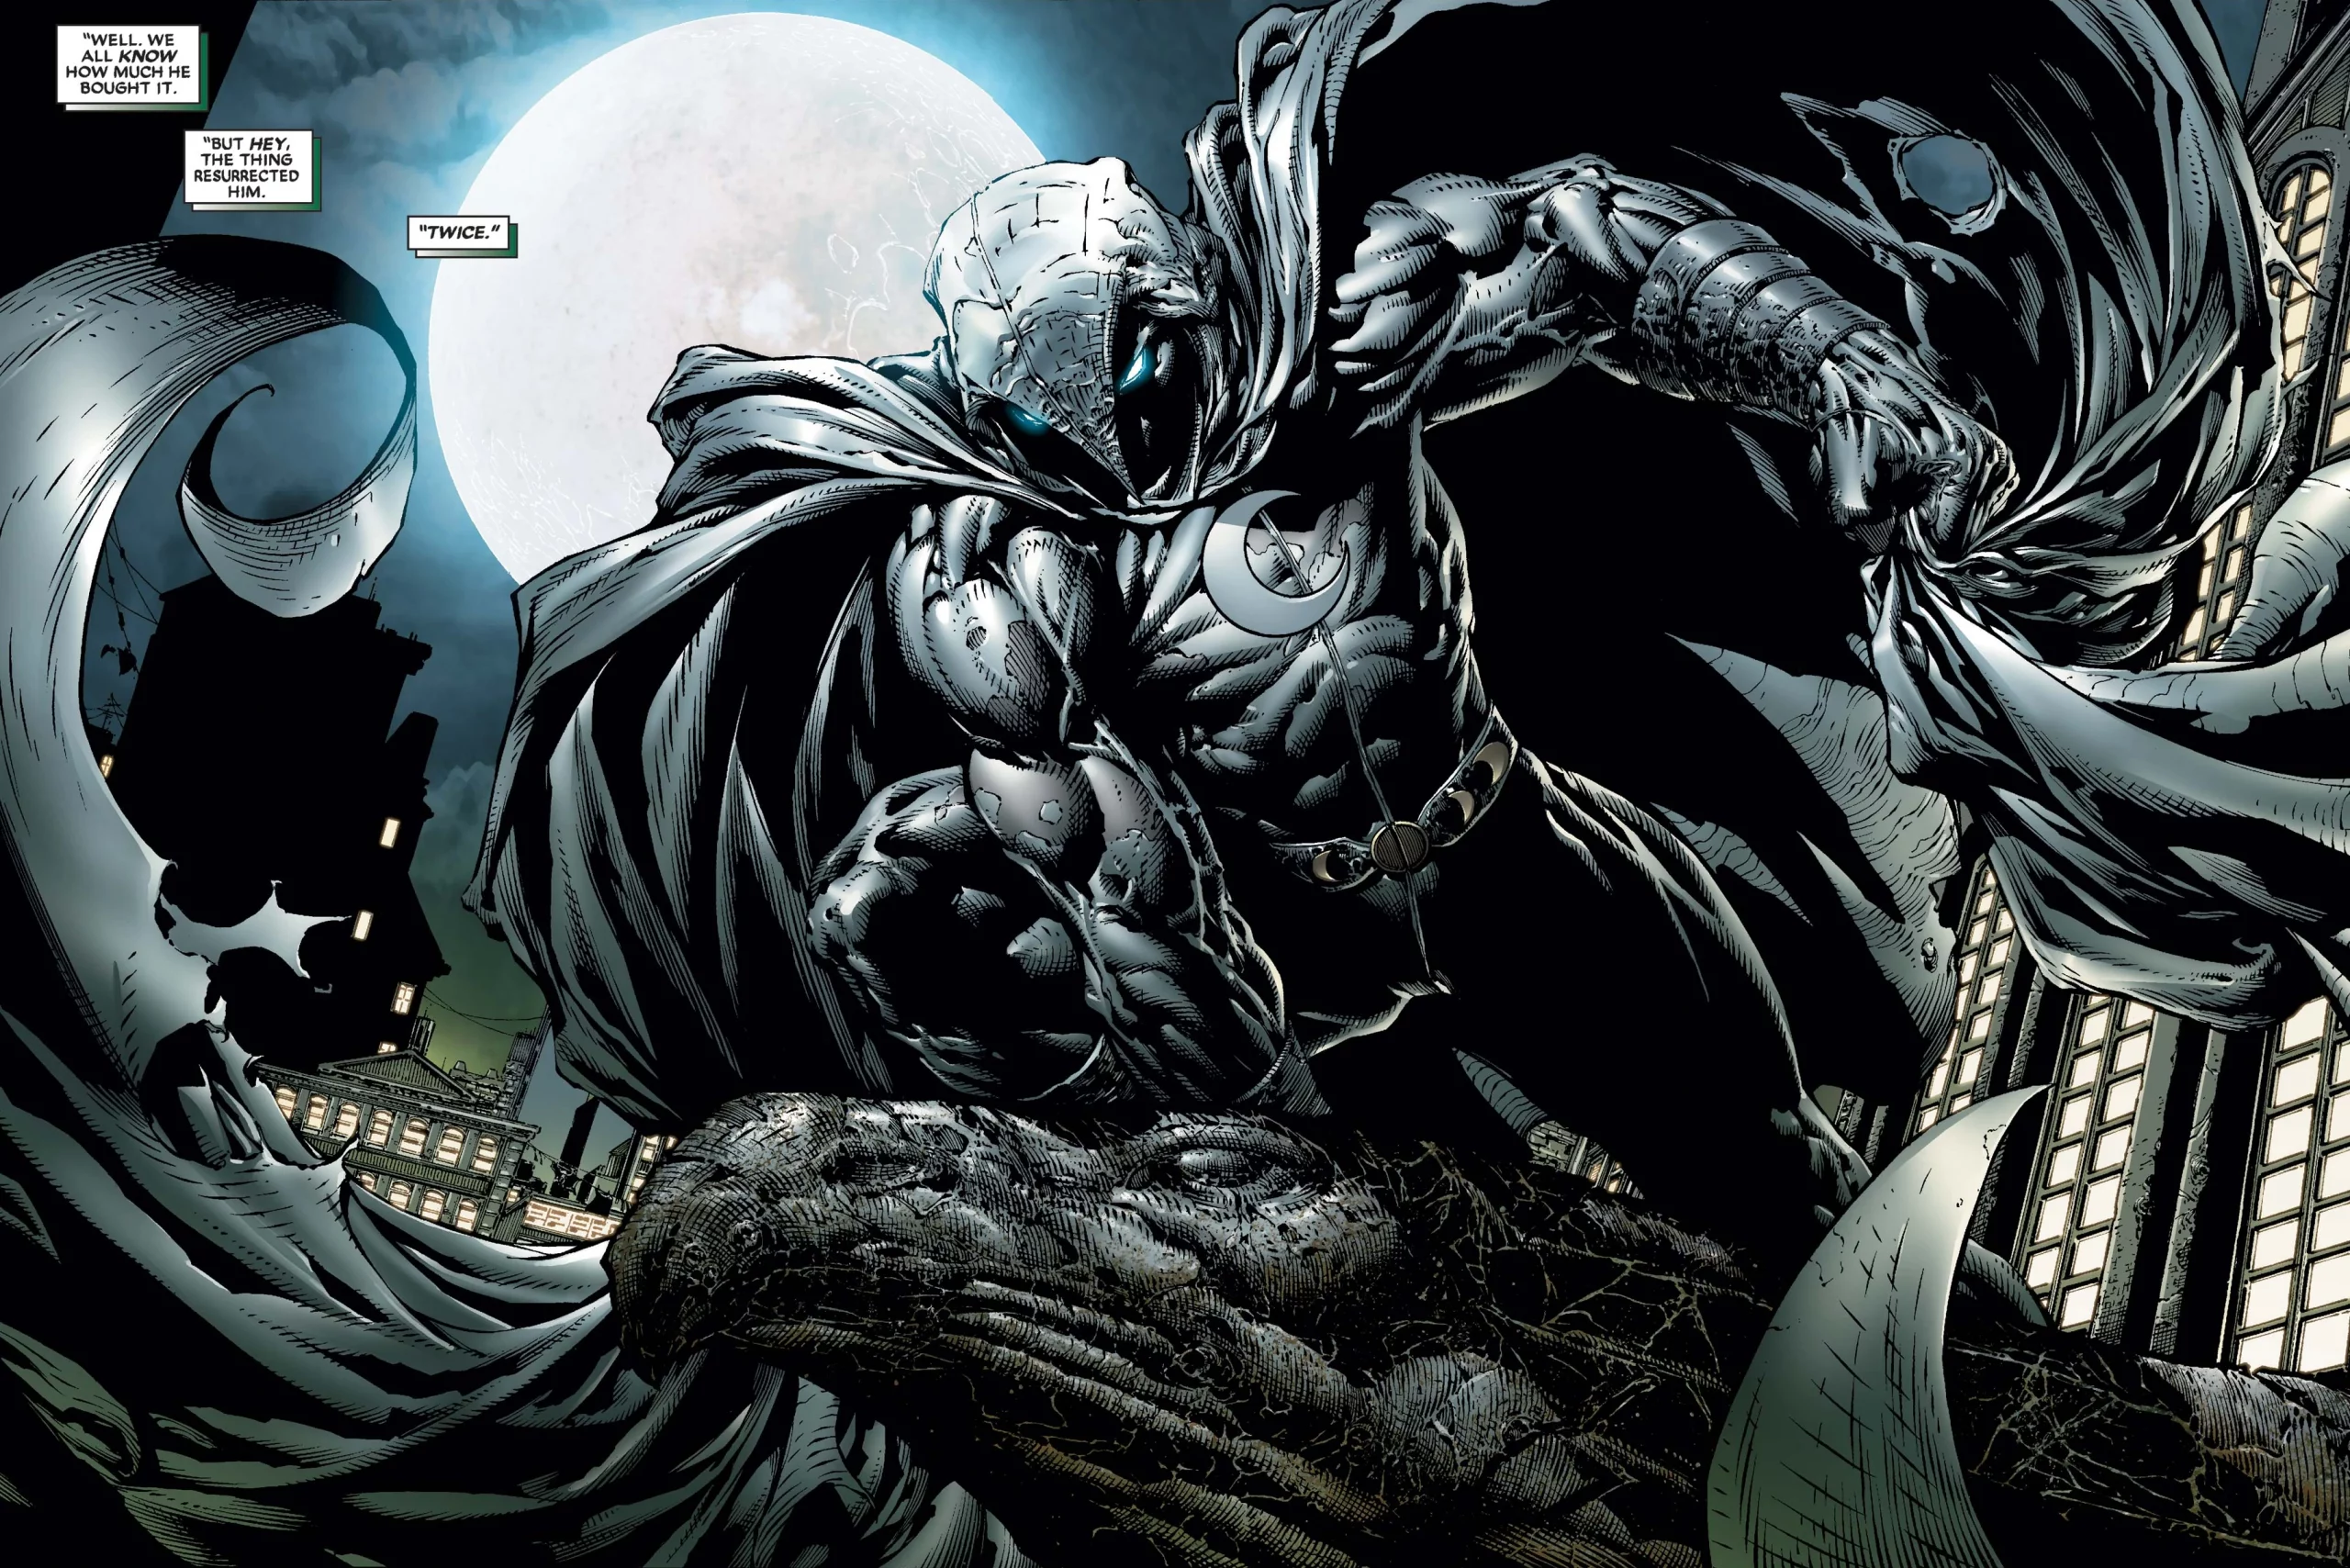 Moon Knight is more skilled than other superheroes